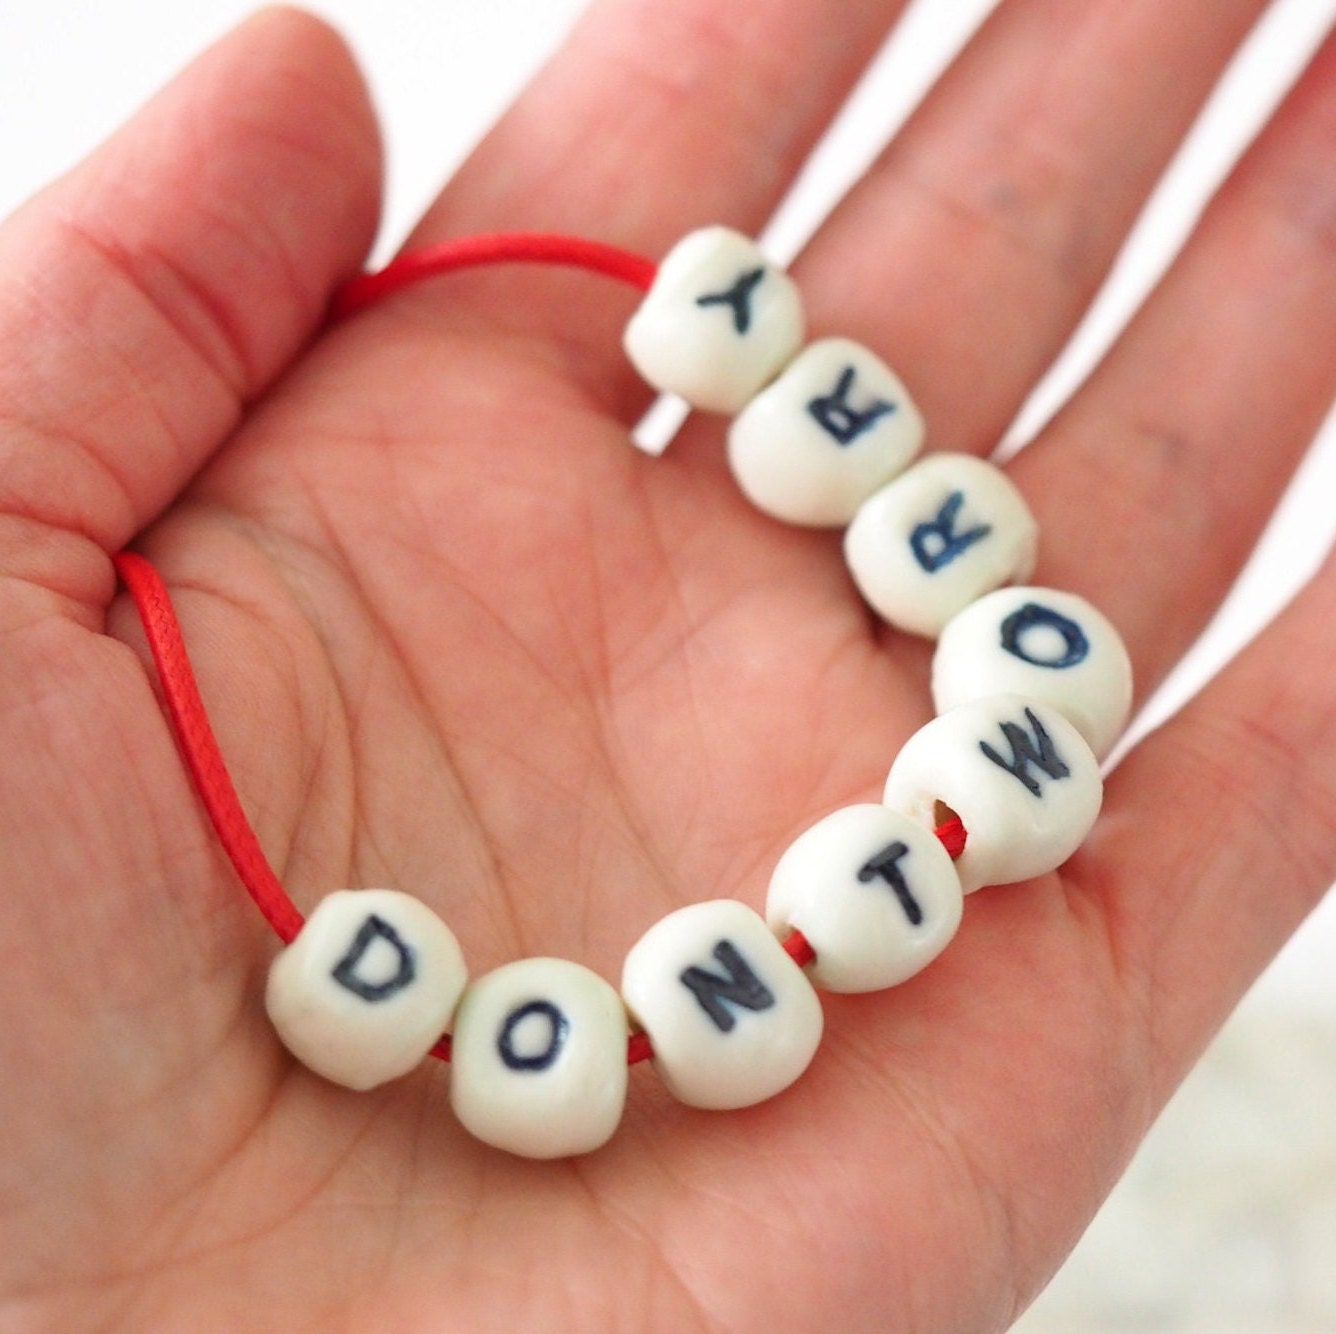 Don't Worry - Porcelain Bead Necklace